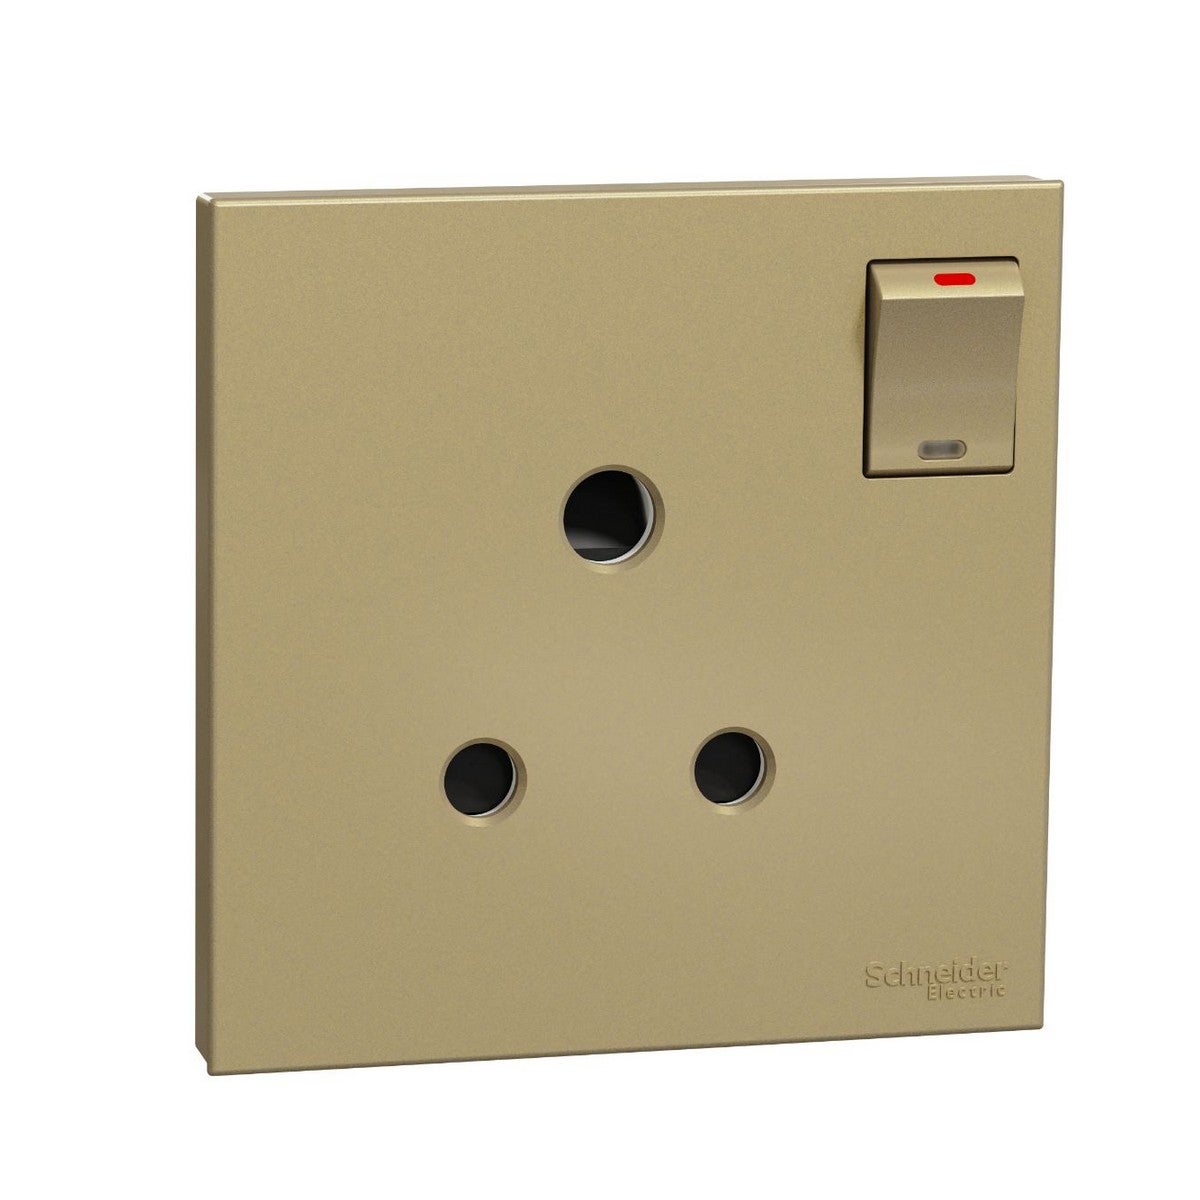 AvatarOn C, Switched socket, 15A 250V, 1 Gang, 3 Round Pin, Wine Gold